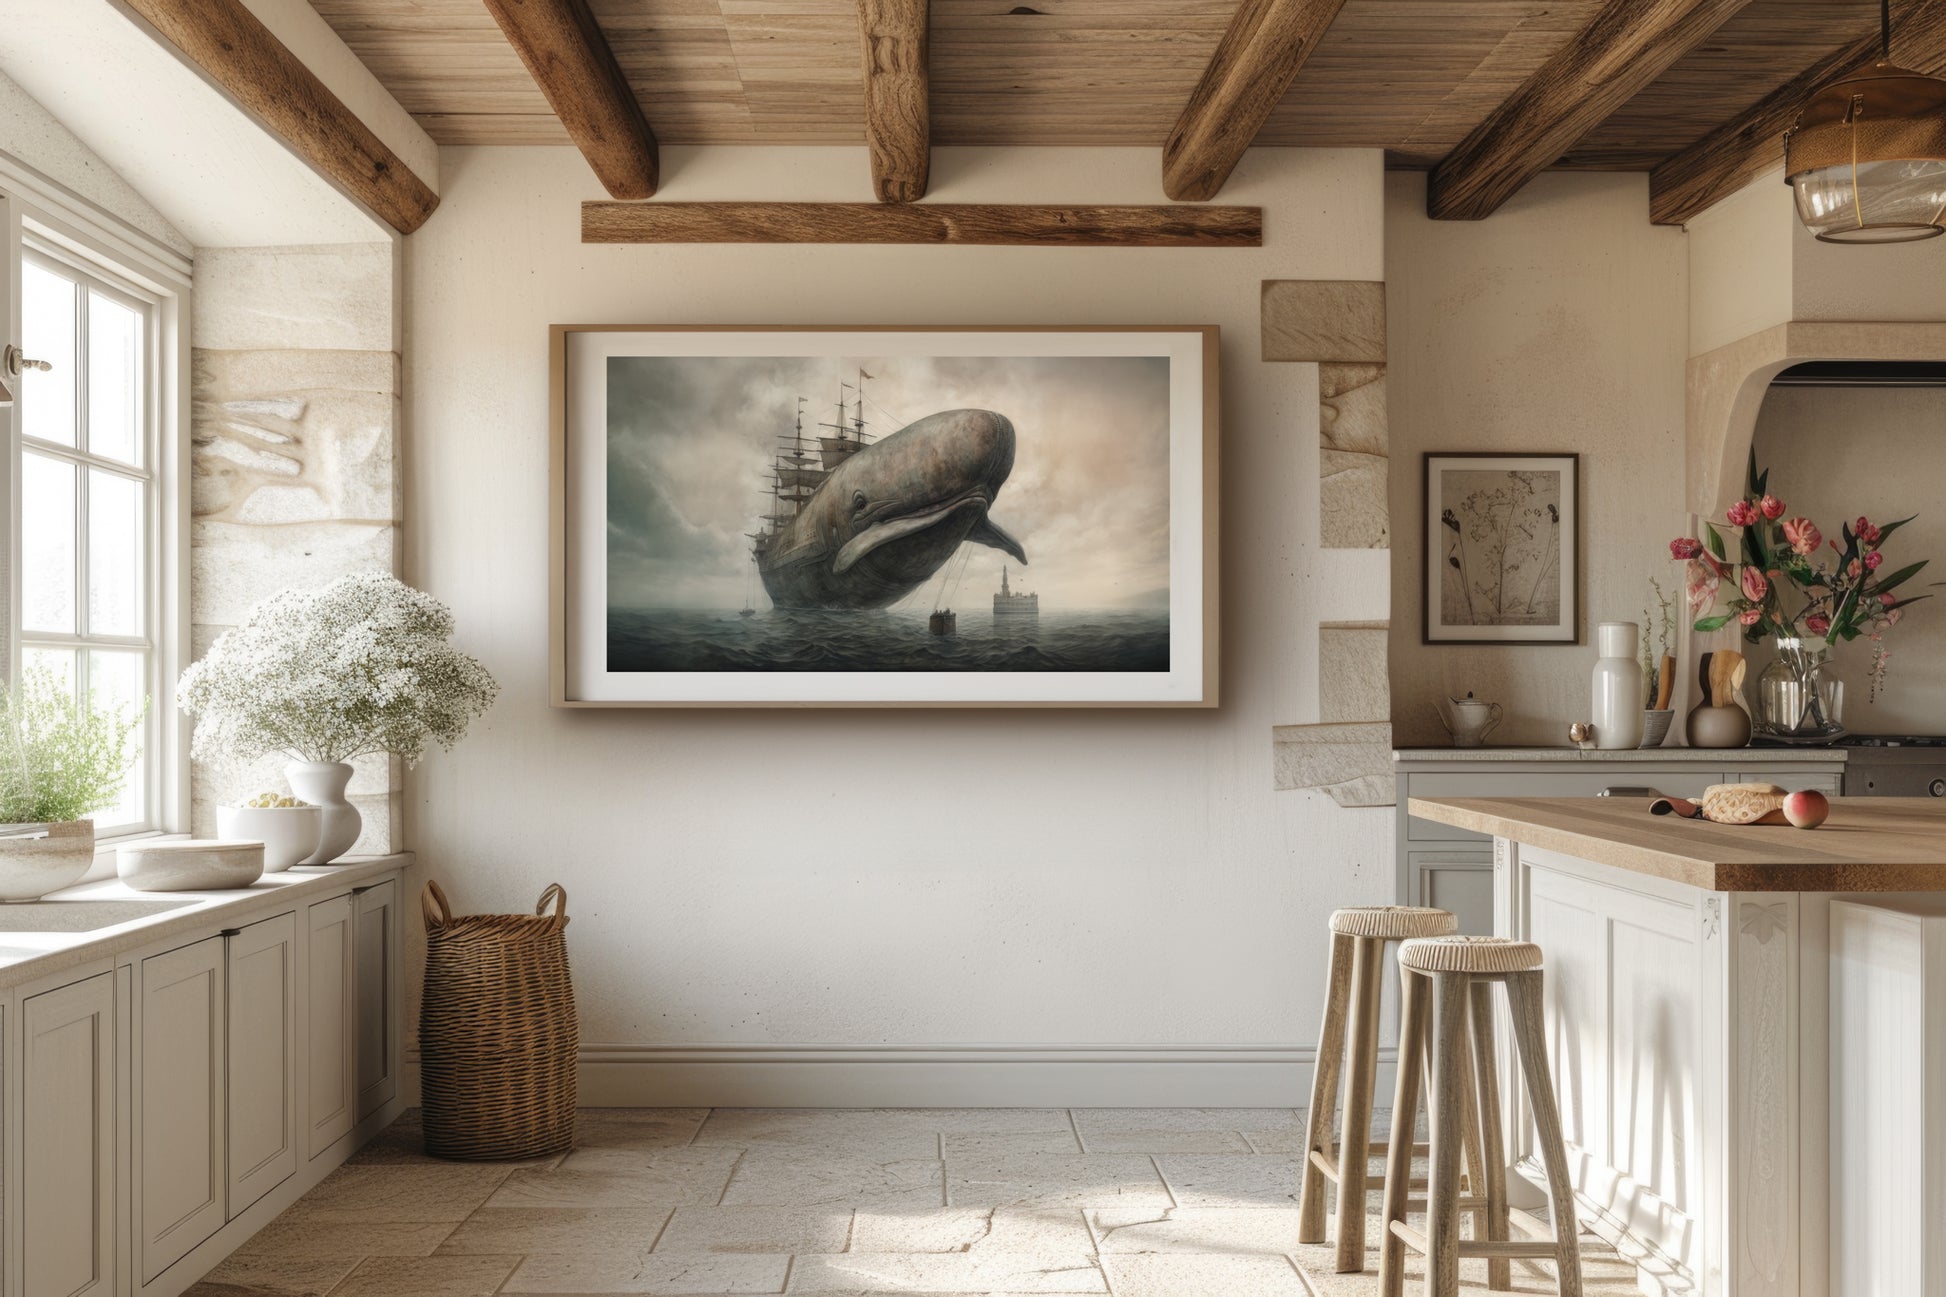 Artwork print featuring a surreal depiction of a whale carrying a ship on its back, set against a backdrop of stormy seas and cloudy skies. This fine art print is a captivating visual fable.